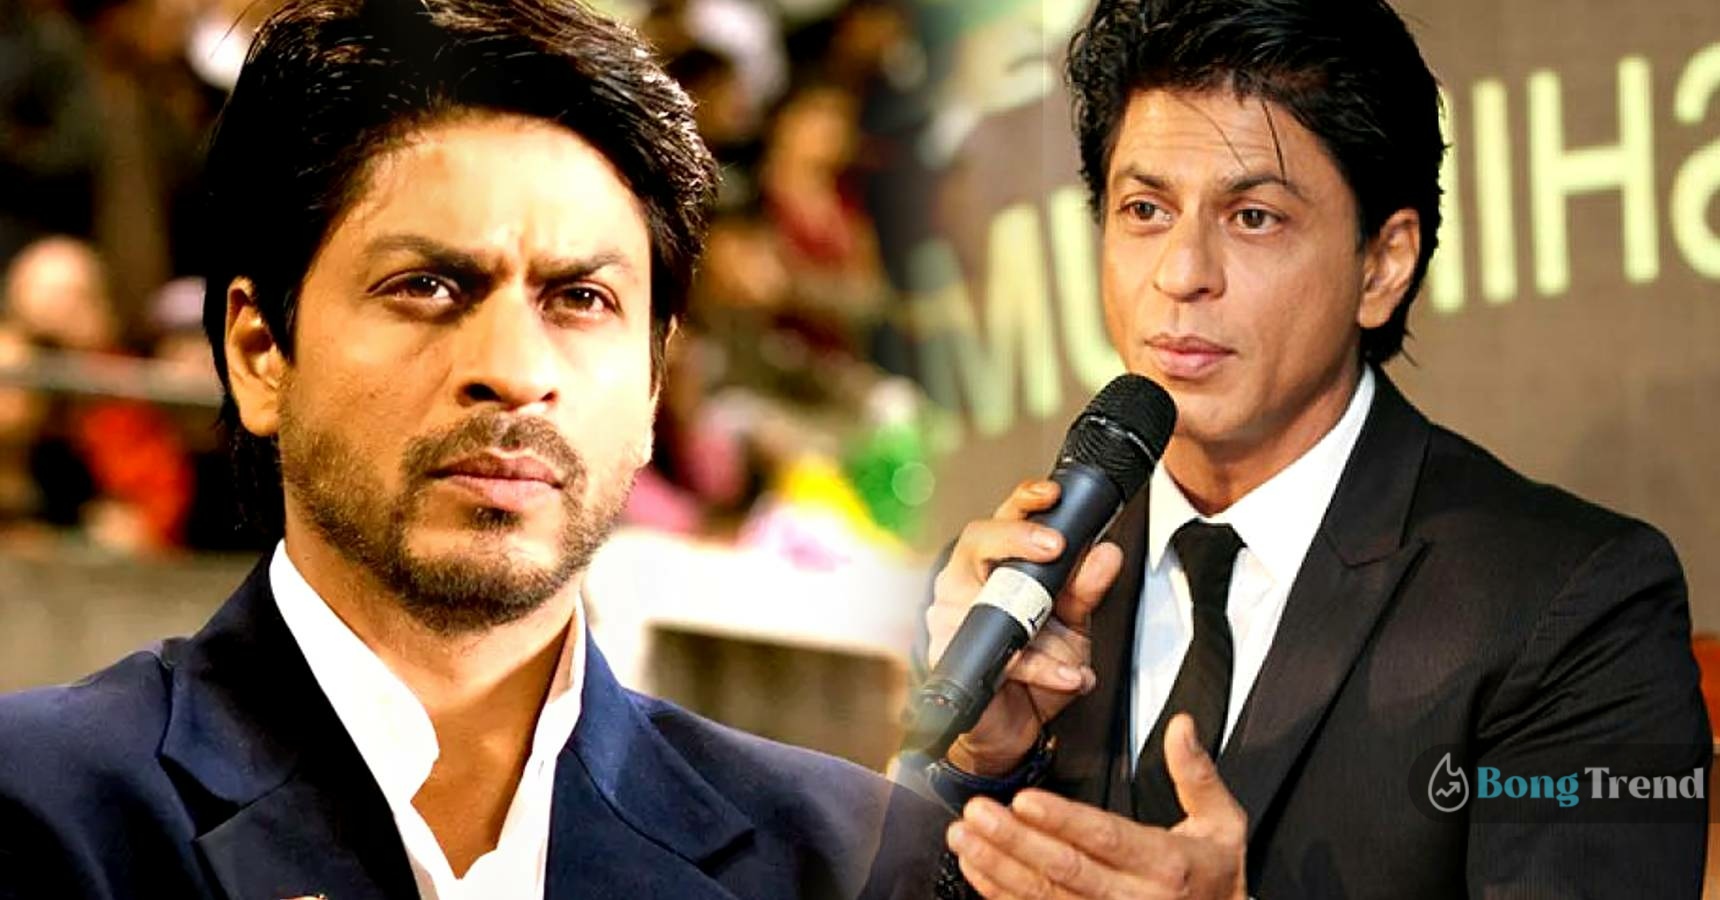 When Shah Rukh Khan revealed they thought Chak De! India is going to be flop at box office